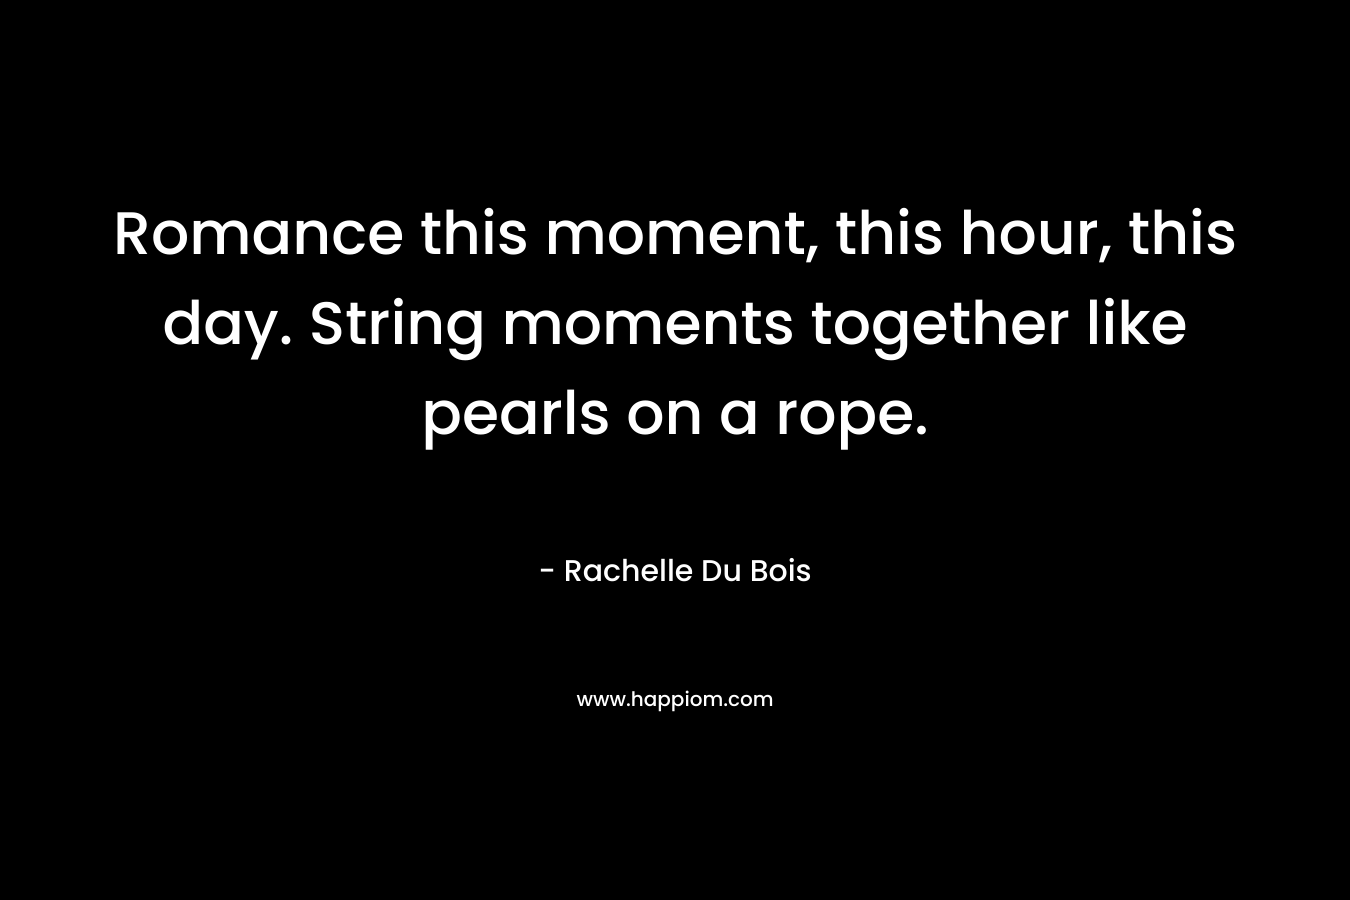 Romance this moment, this hour, this day. String moments together like pearls on a rope. – Rachelle Du Bois